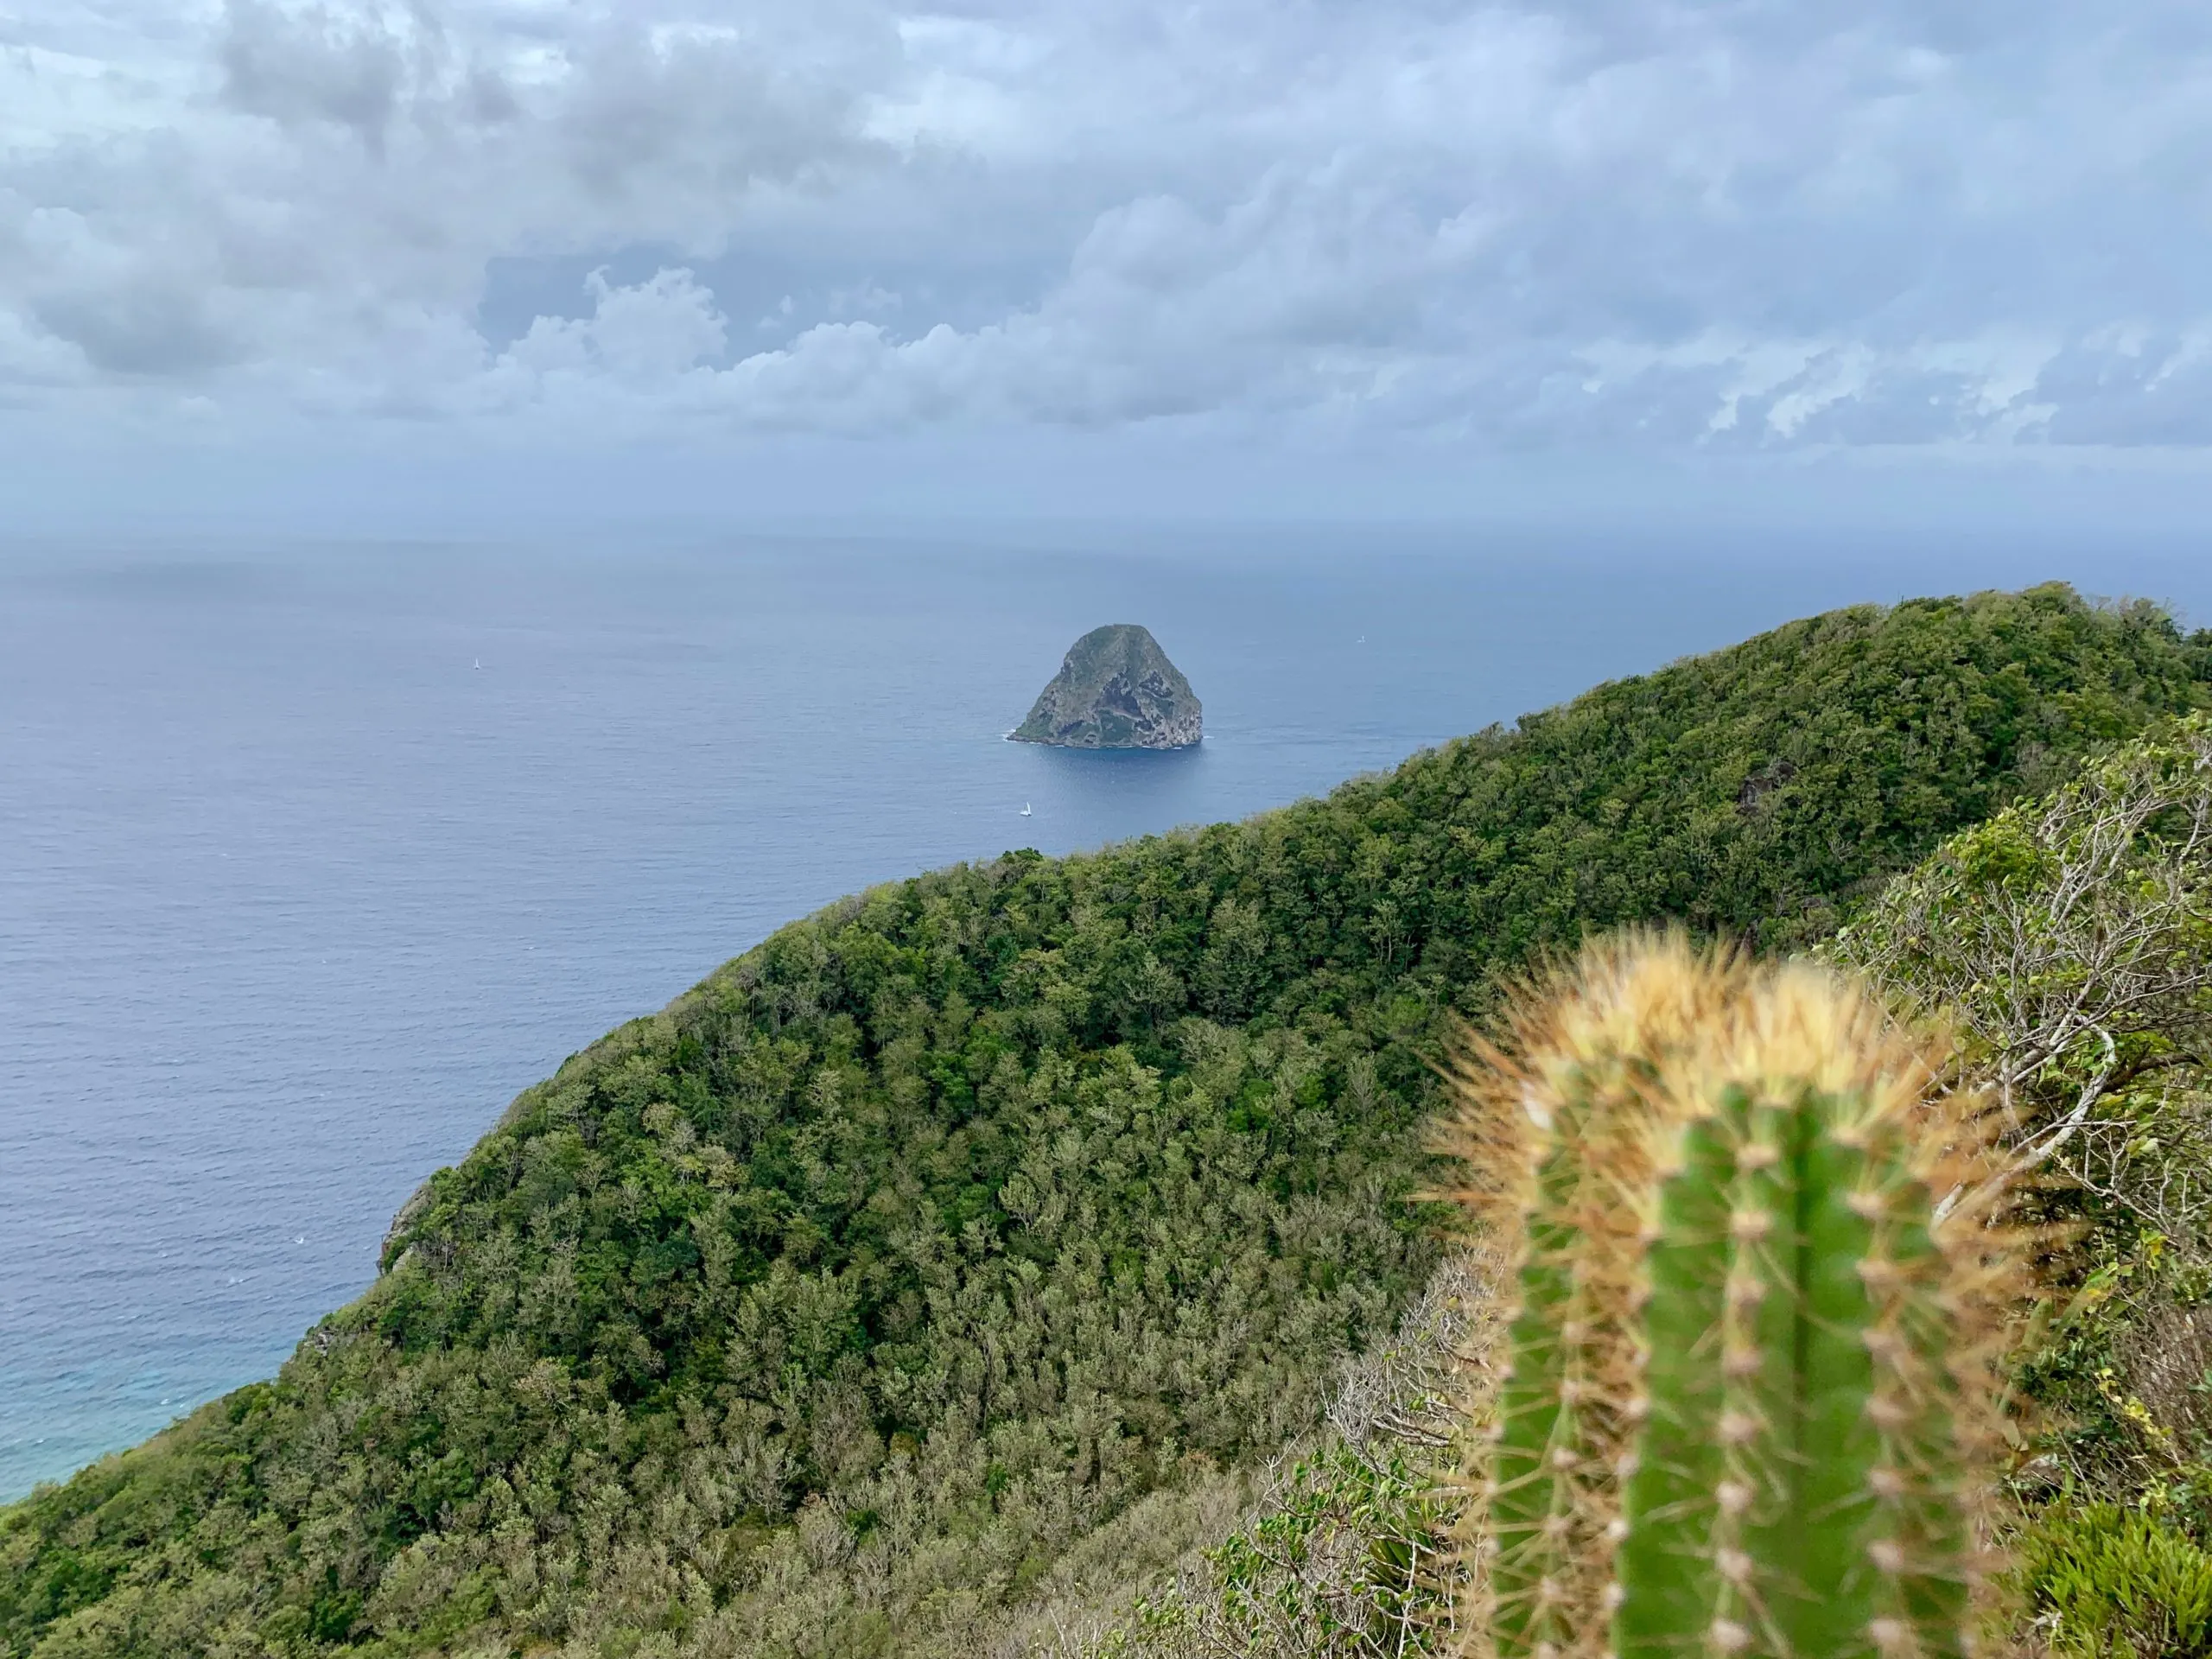 A view of Le Diamant rock with a cactus in the foreground 